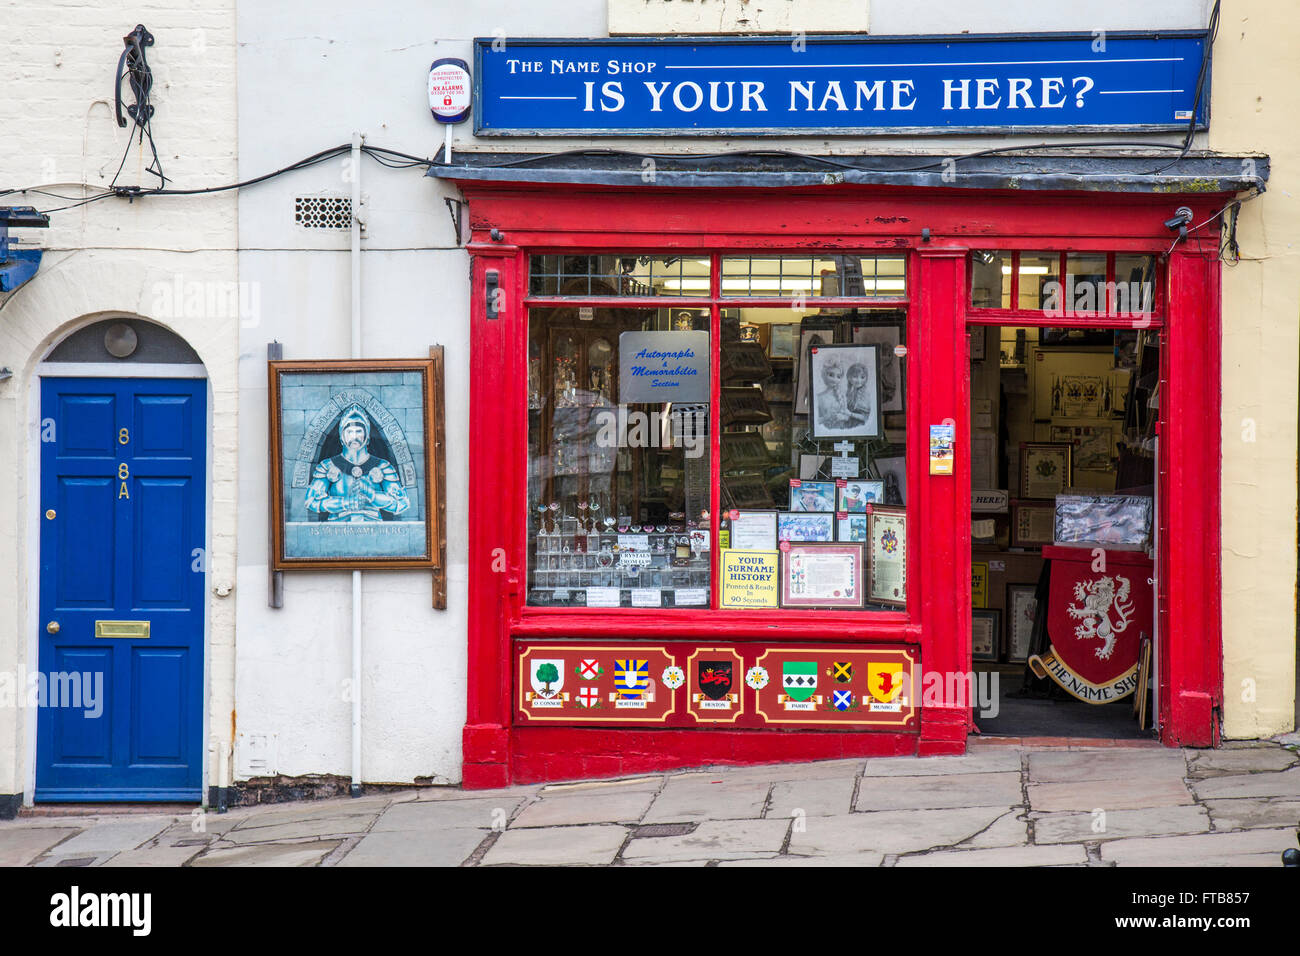 A shop on the main street in Ironbridge, Shropshire, England. The shop gives people history of their names. Stock Photo